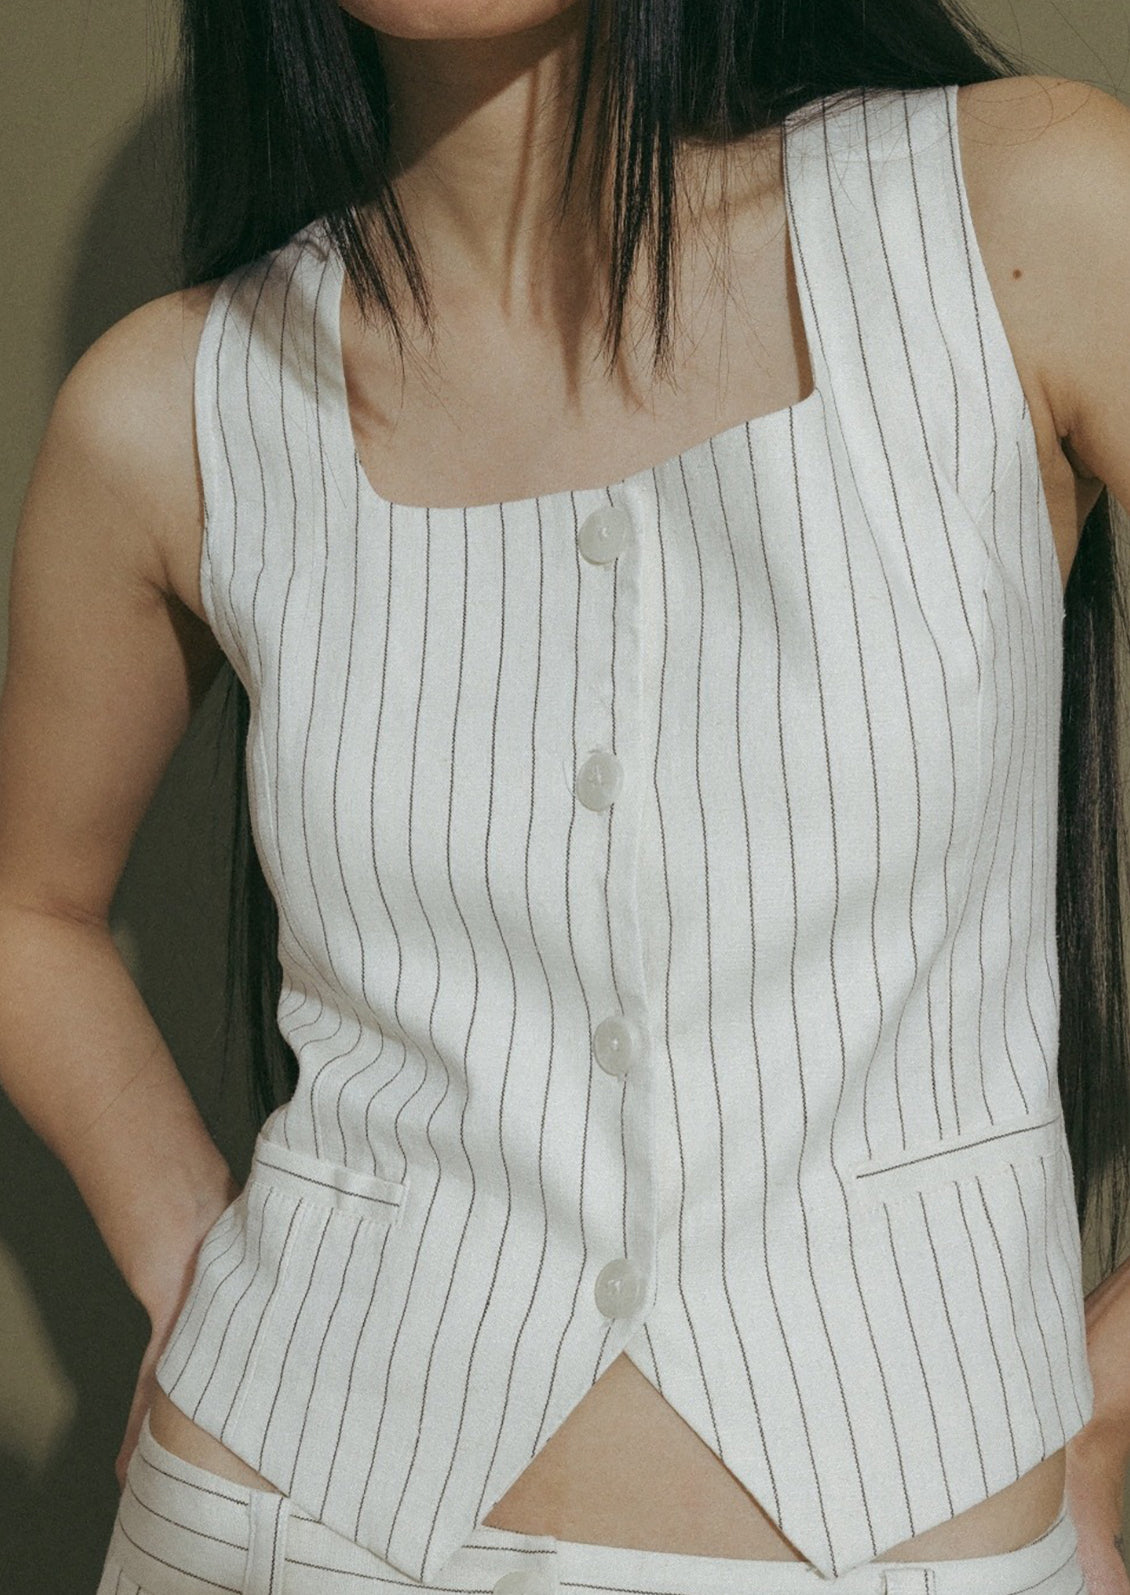 A woman wearing a white baseball style vest with black pinstripe.